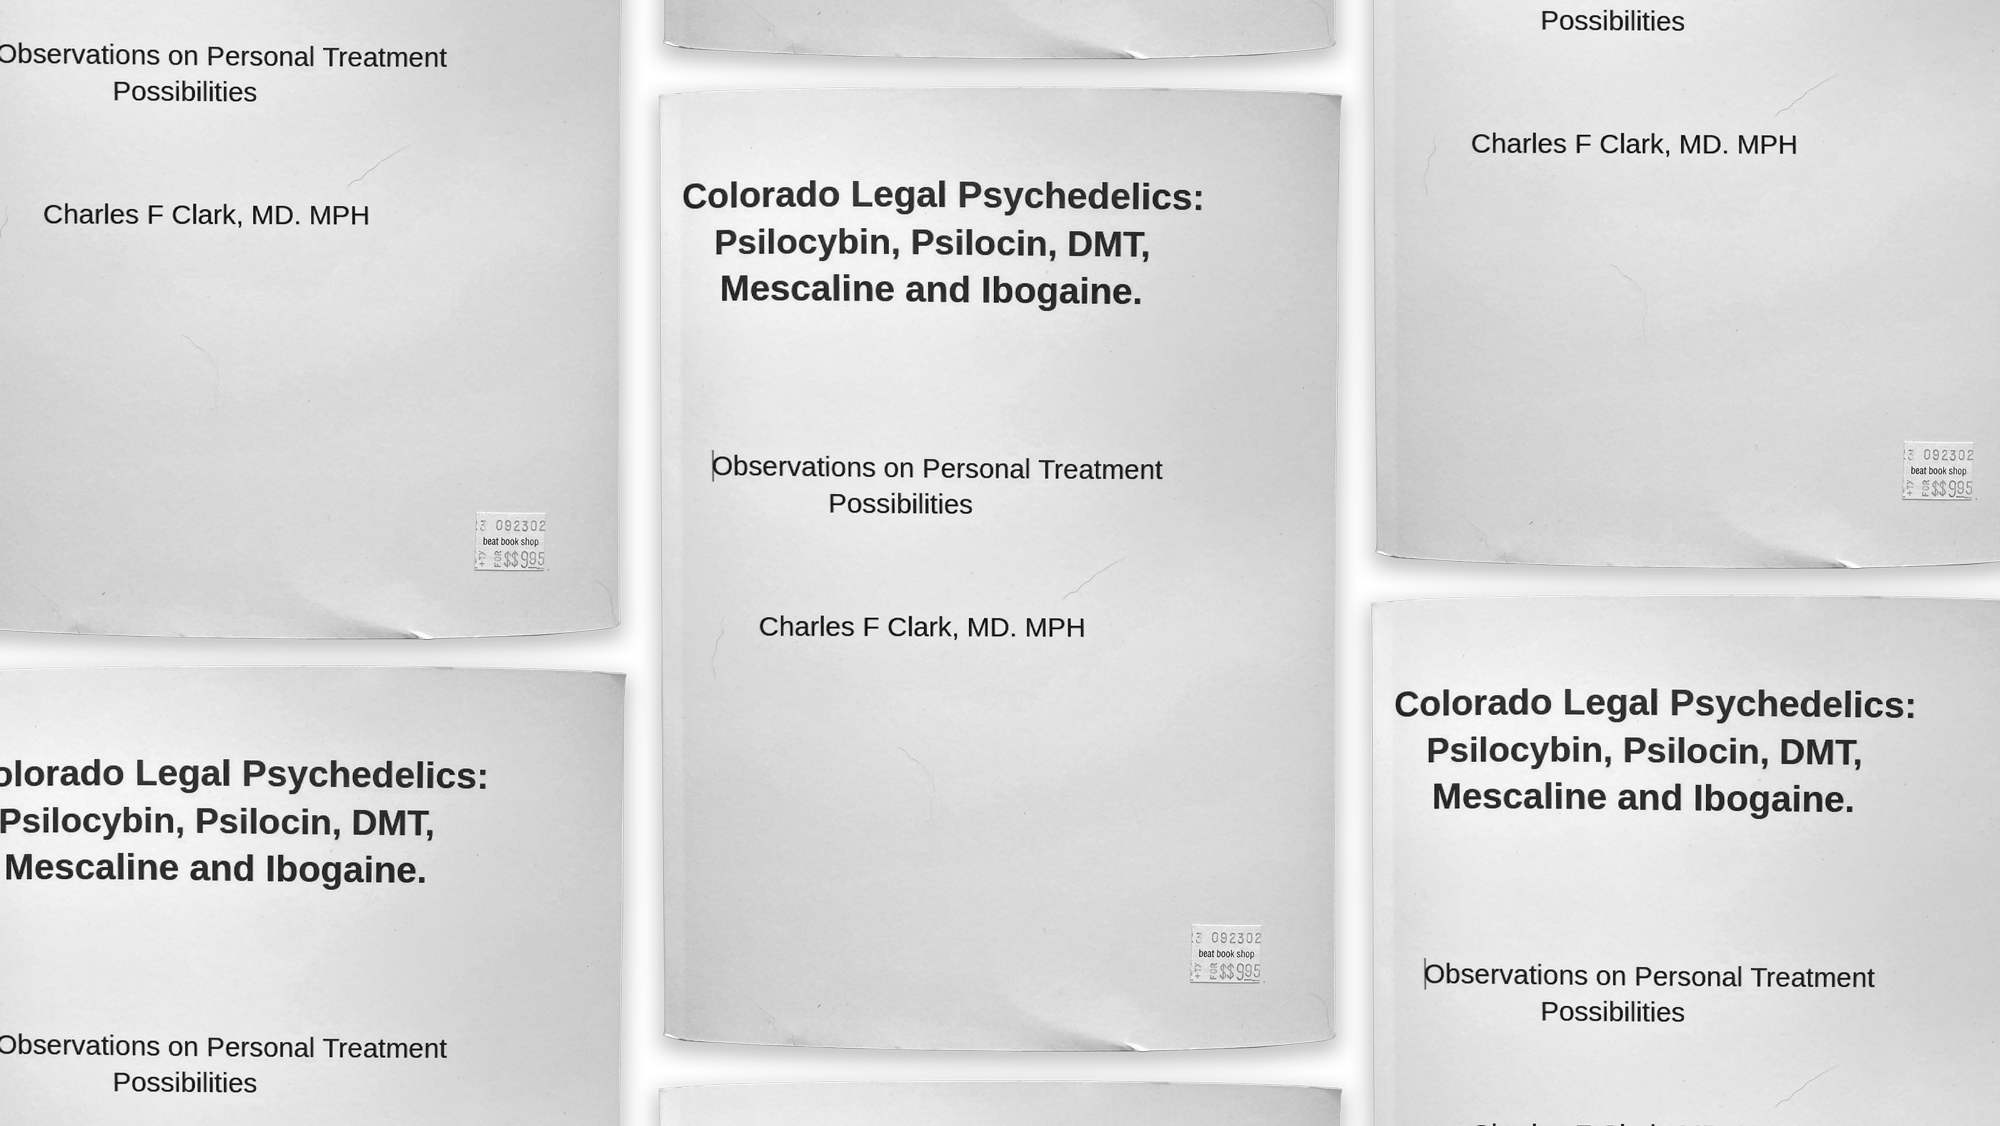 The plain white cover of the scientific pamphlet titled Colorado Legal Psychedelics: Psilocybin, Psilocin, DMT, Mescaline and Ibogaine. Observations on Personal Treatment Possibilities